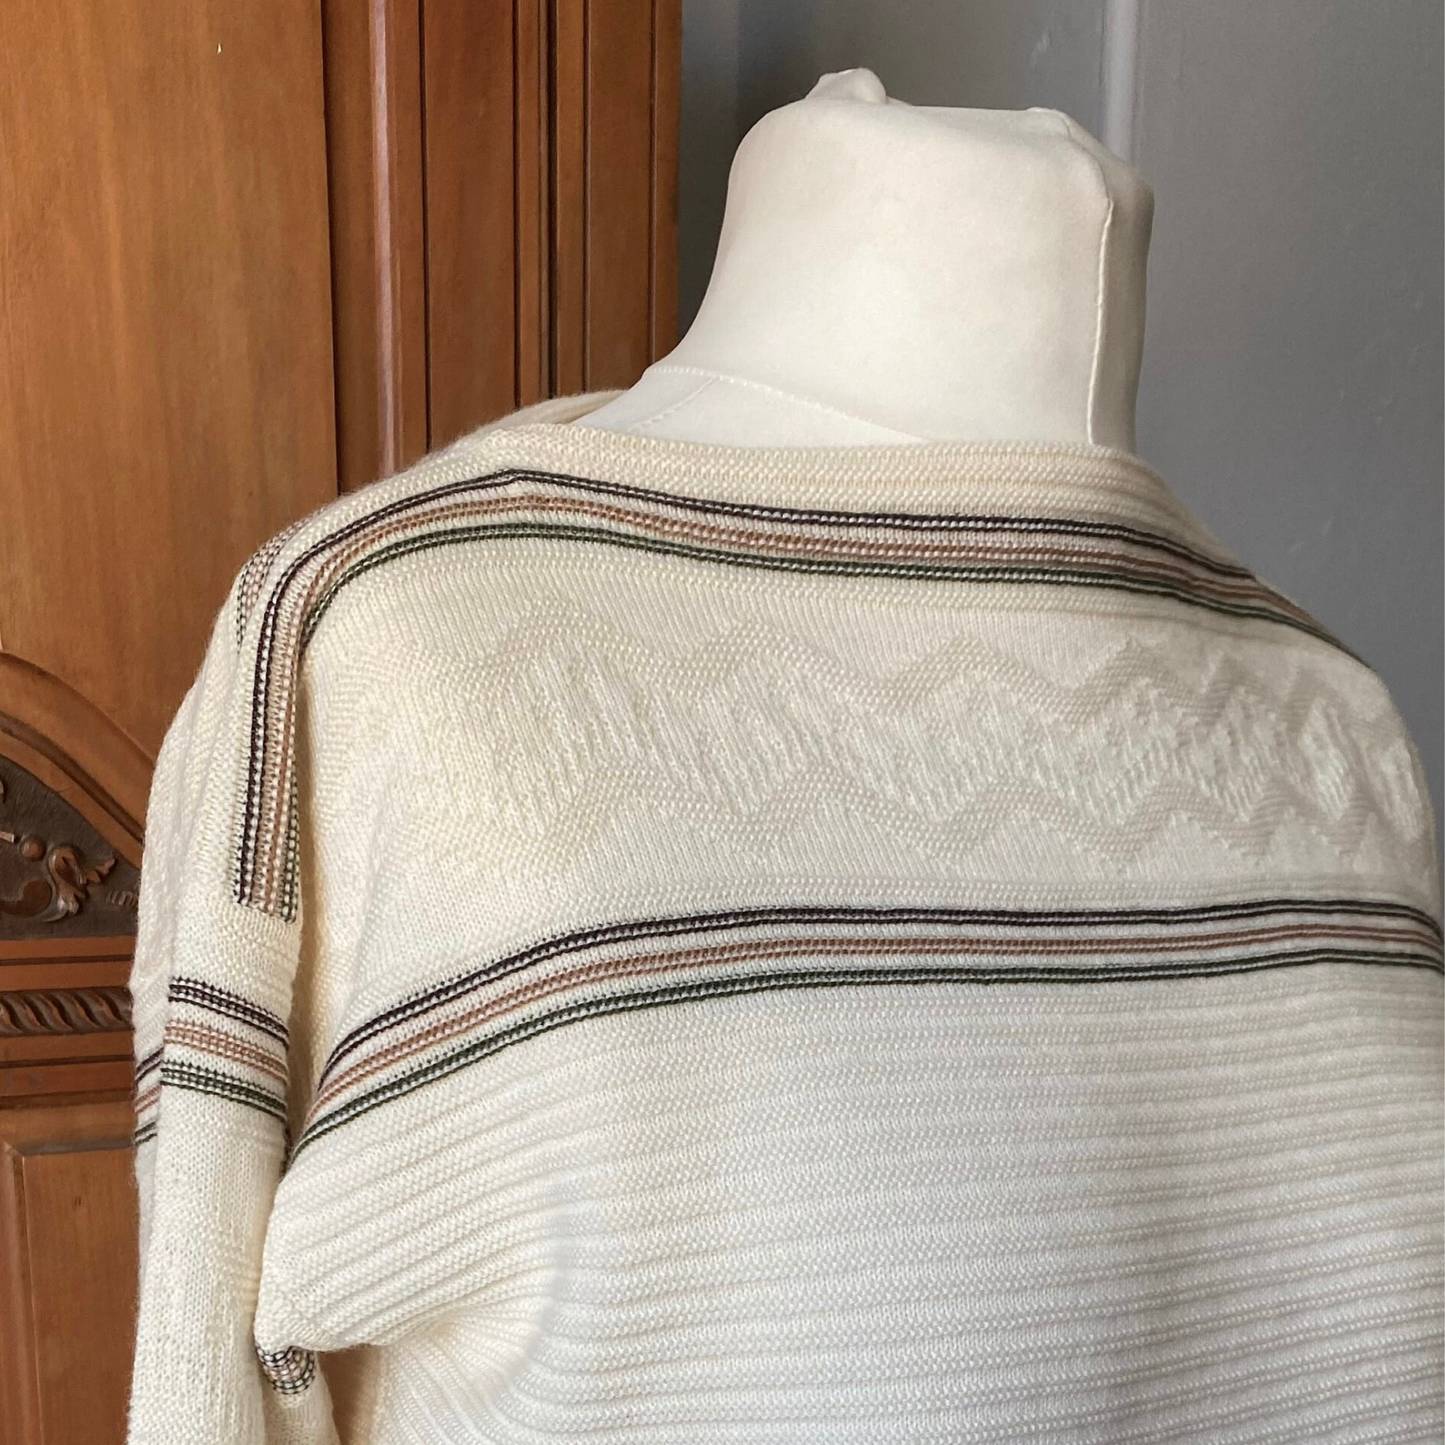 Lightweight cream jumper with chocolate brown, green, and tan stripes - Classic and versatile